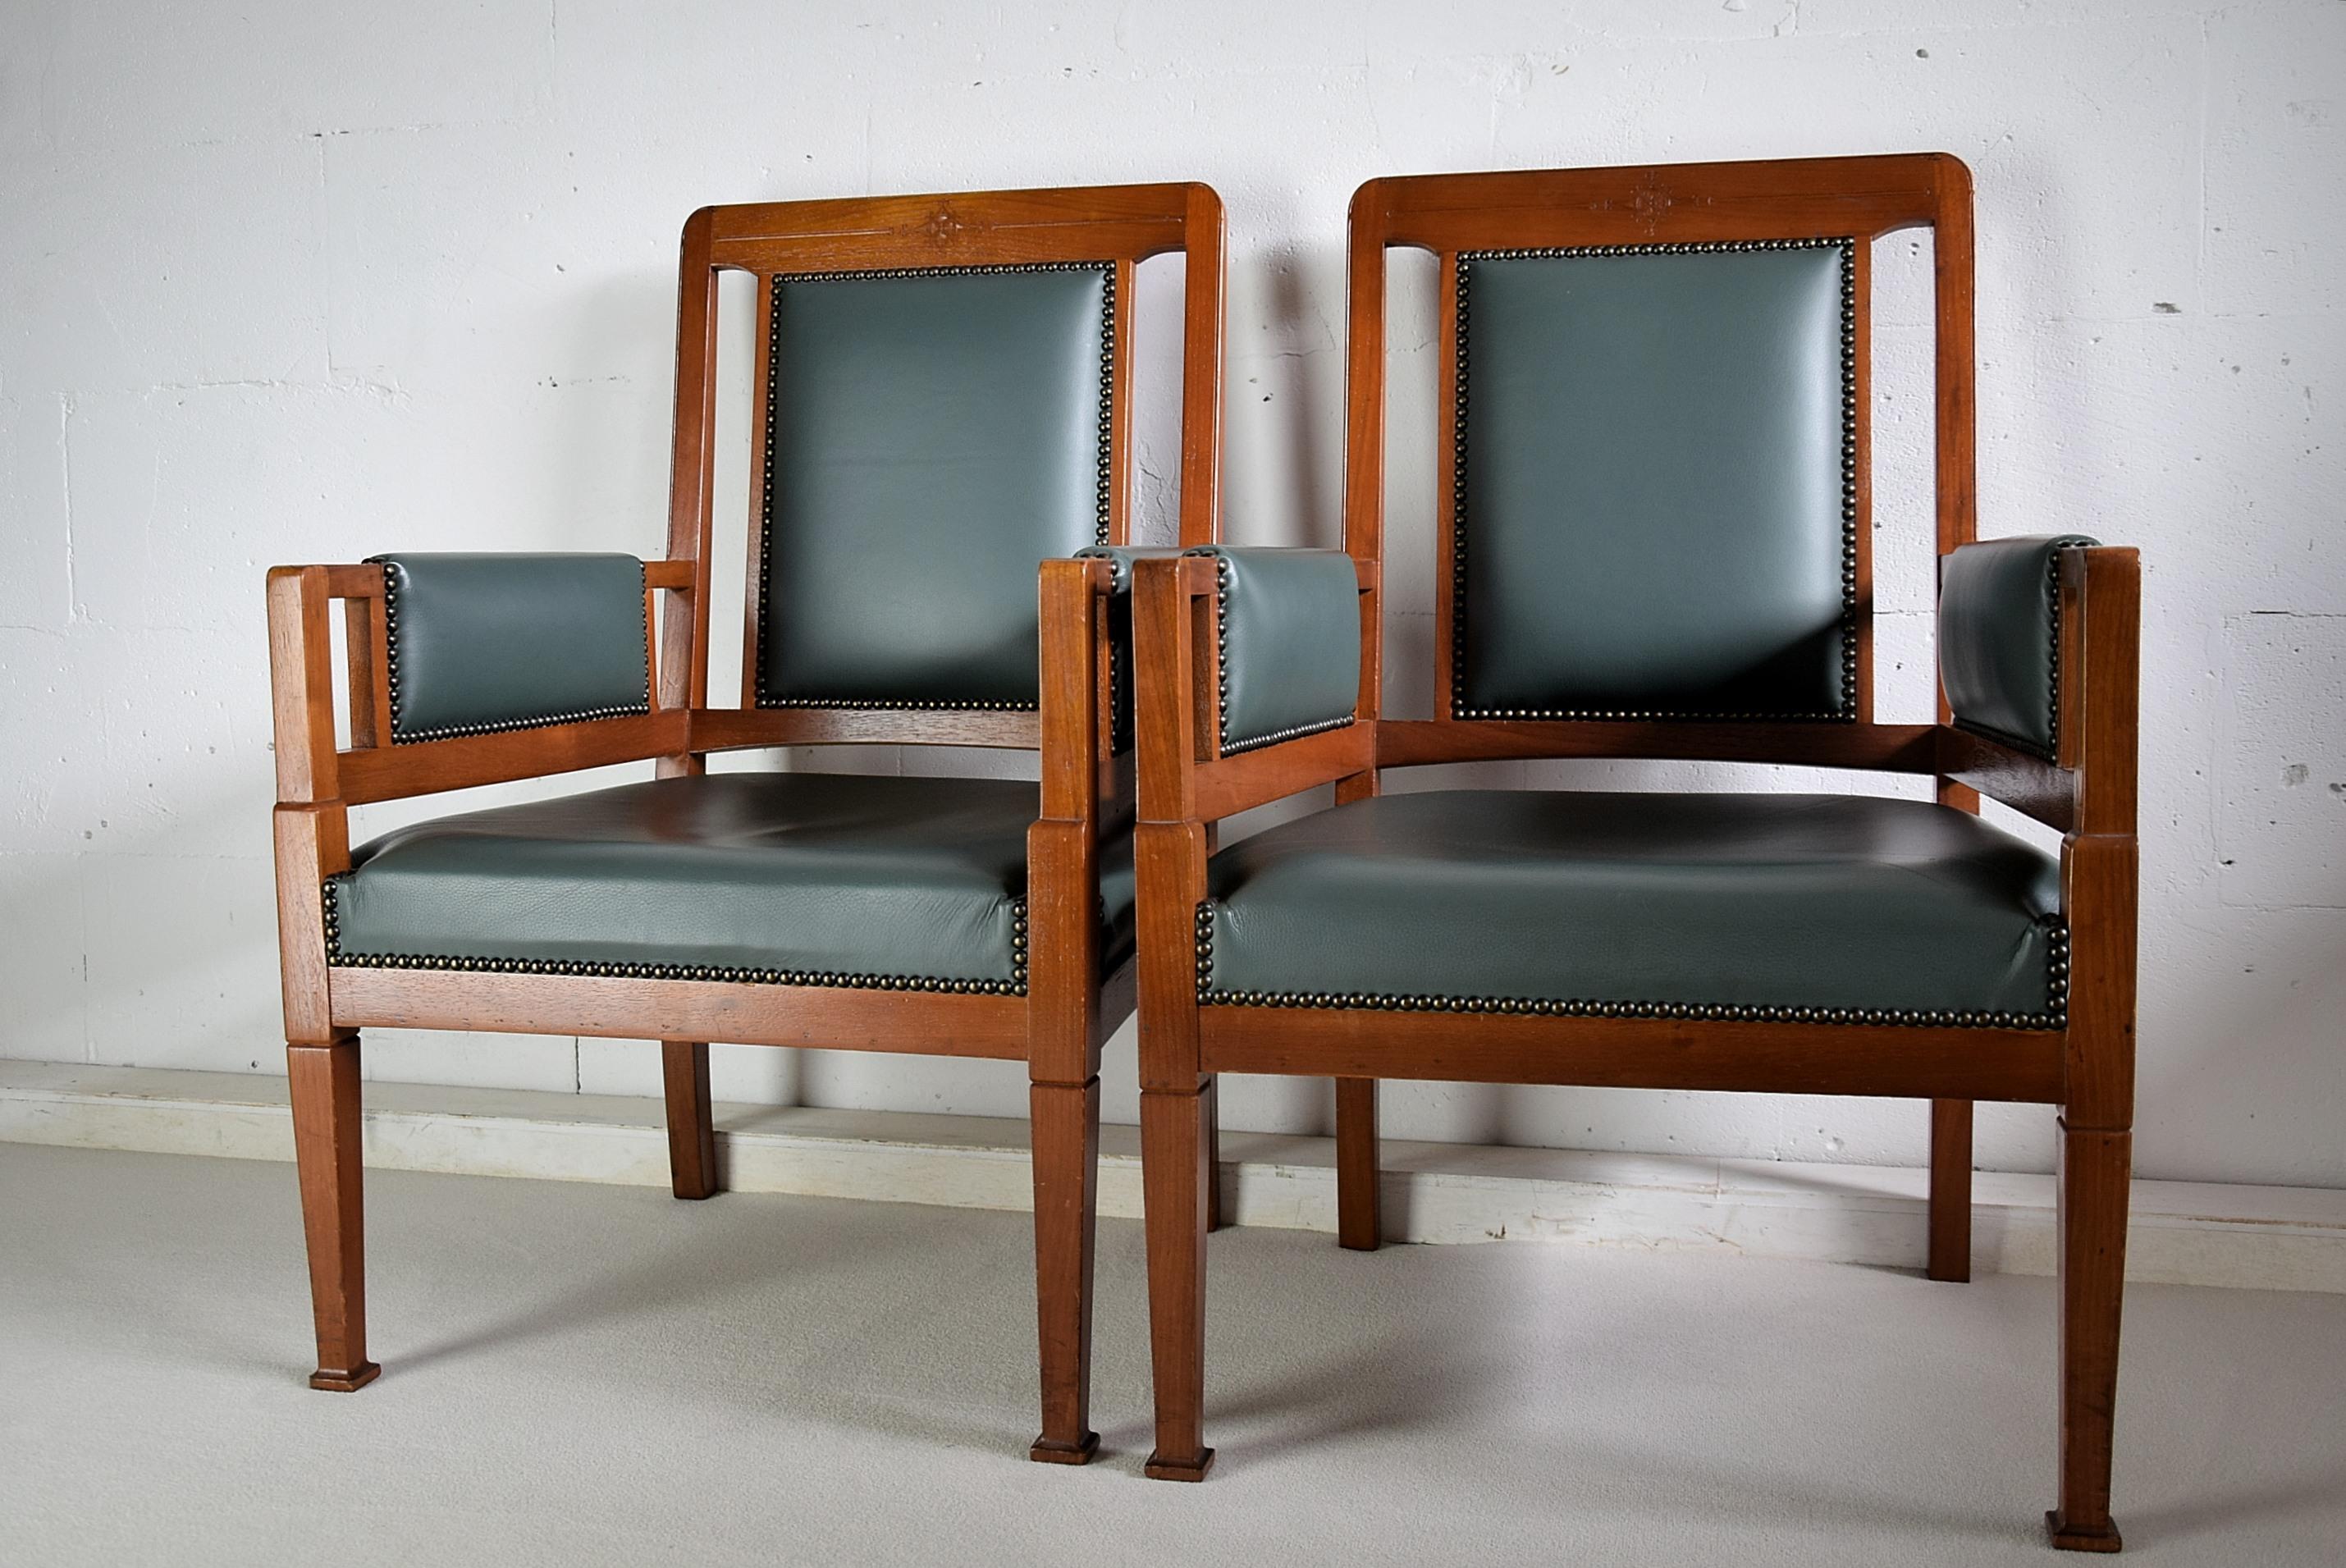 Early 20th Century Art Nouveau Green and Brown Armchairs For Sale